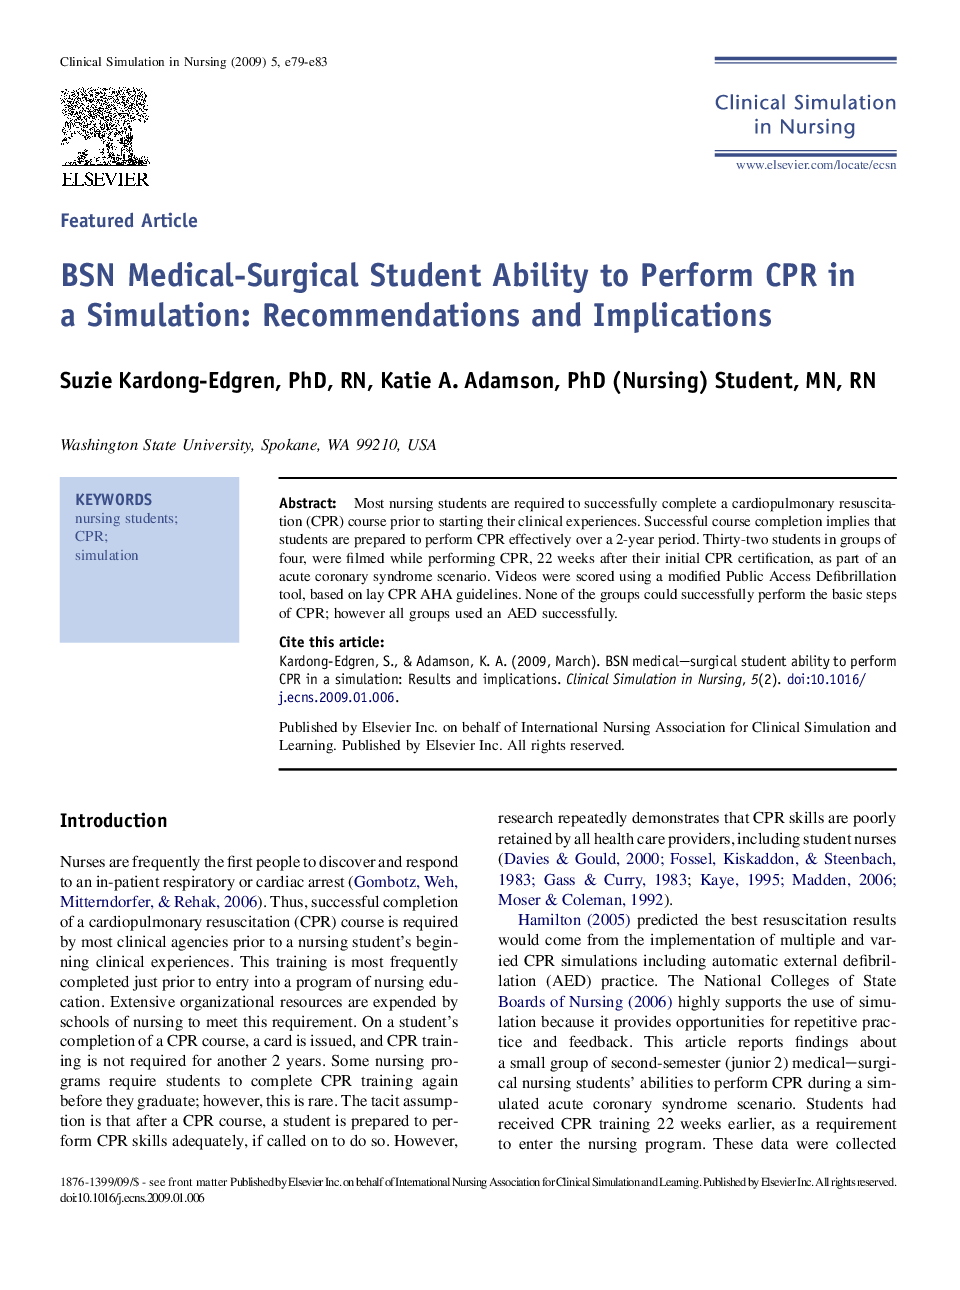 BSN Medical-Surgical Student Ability to Perform CPR in a Simulation: Recommendations and Implications 